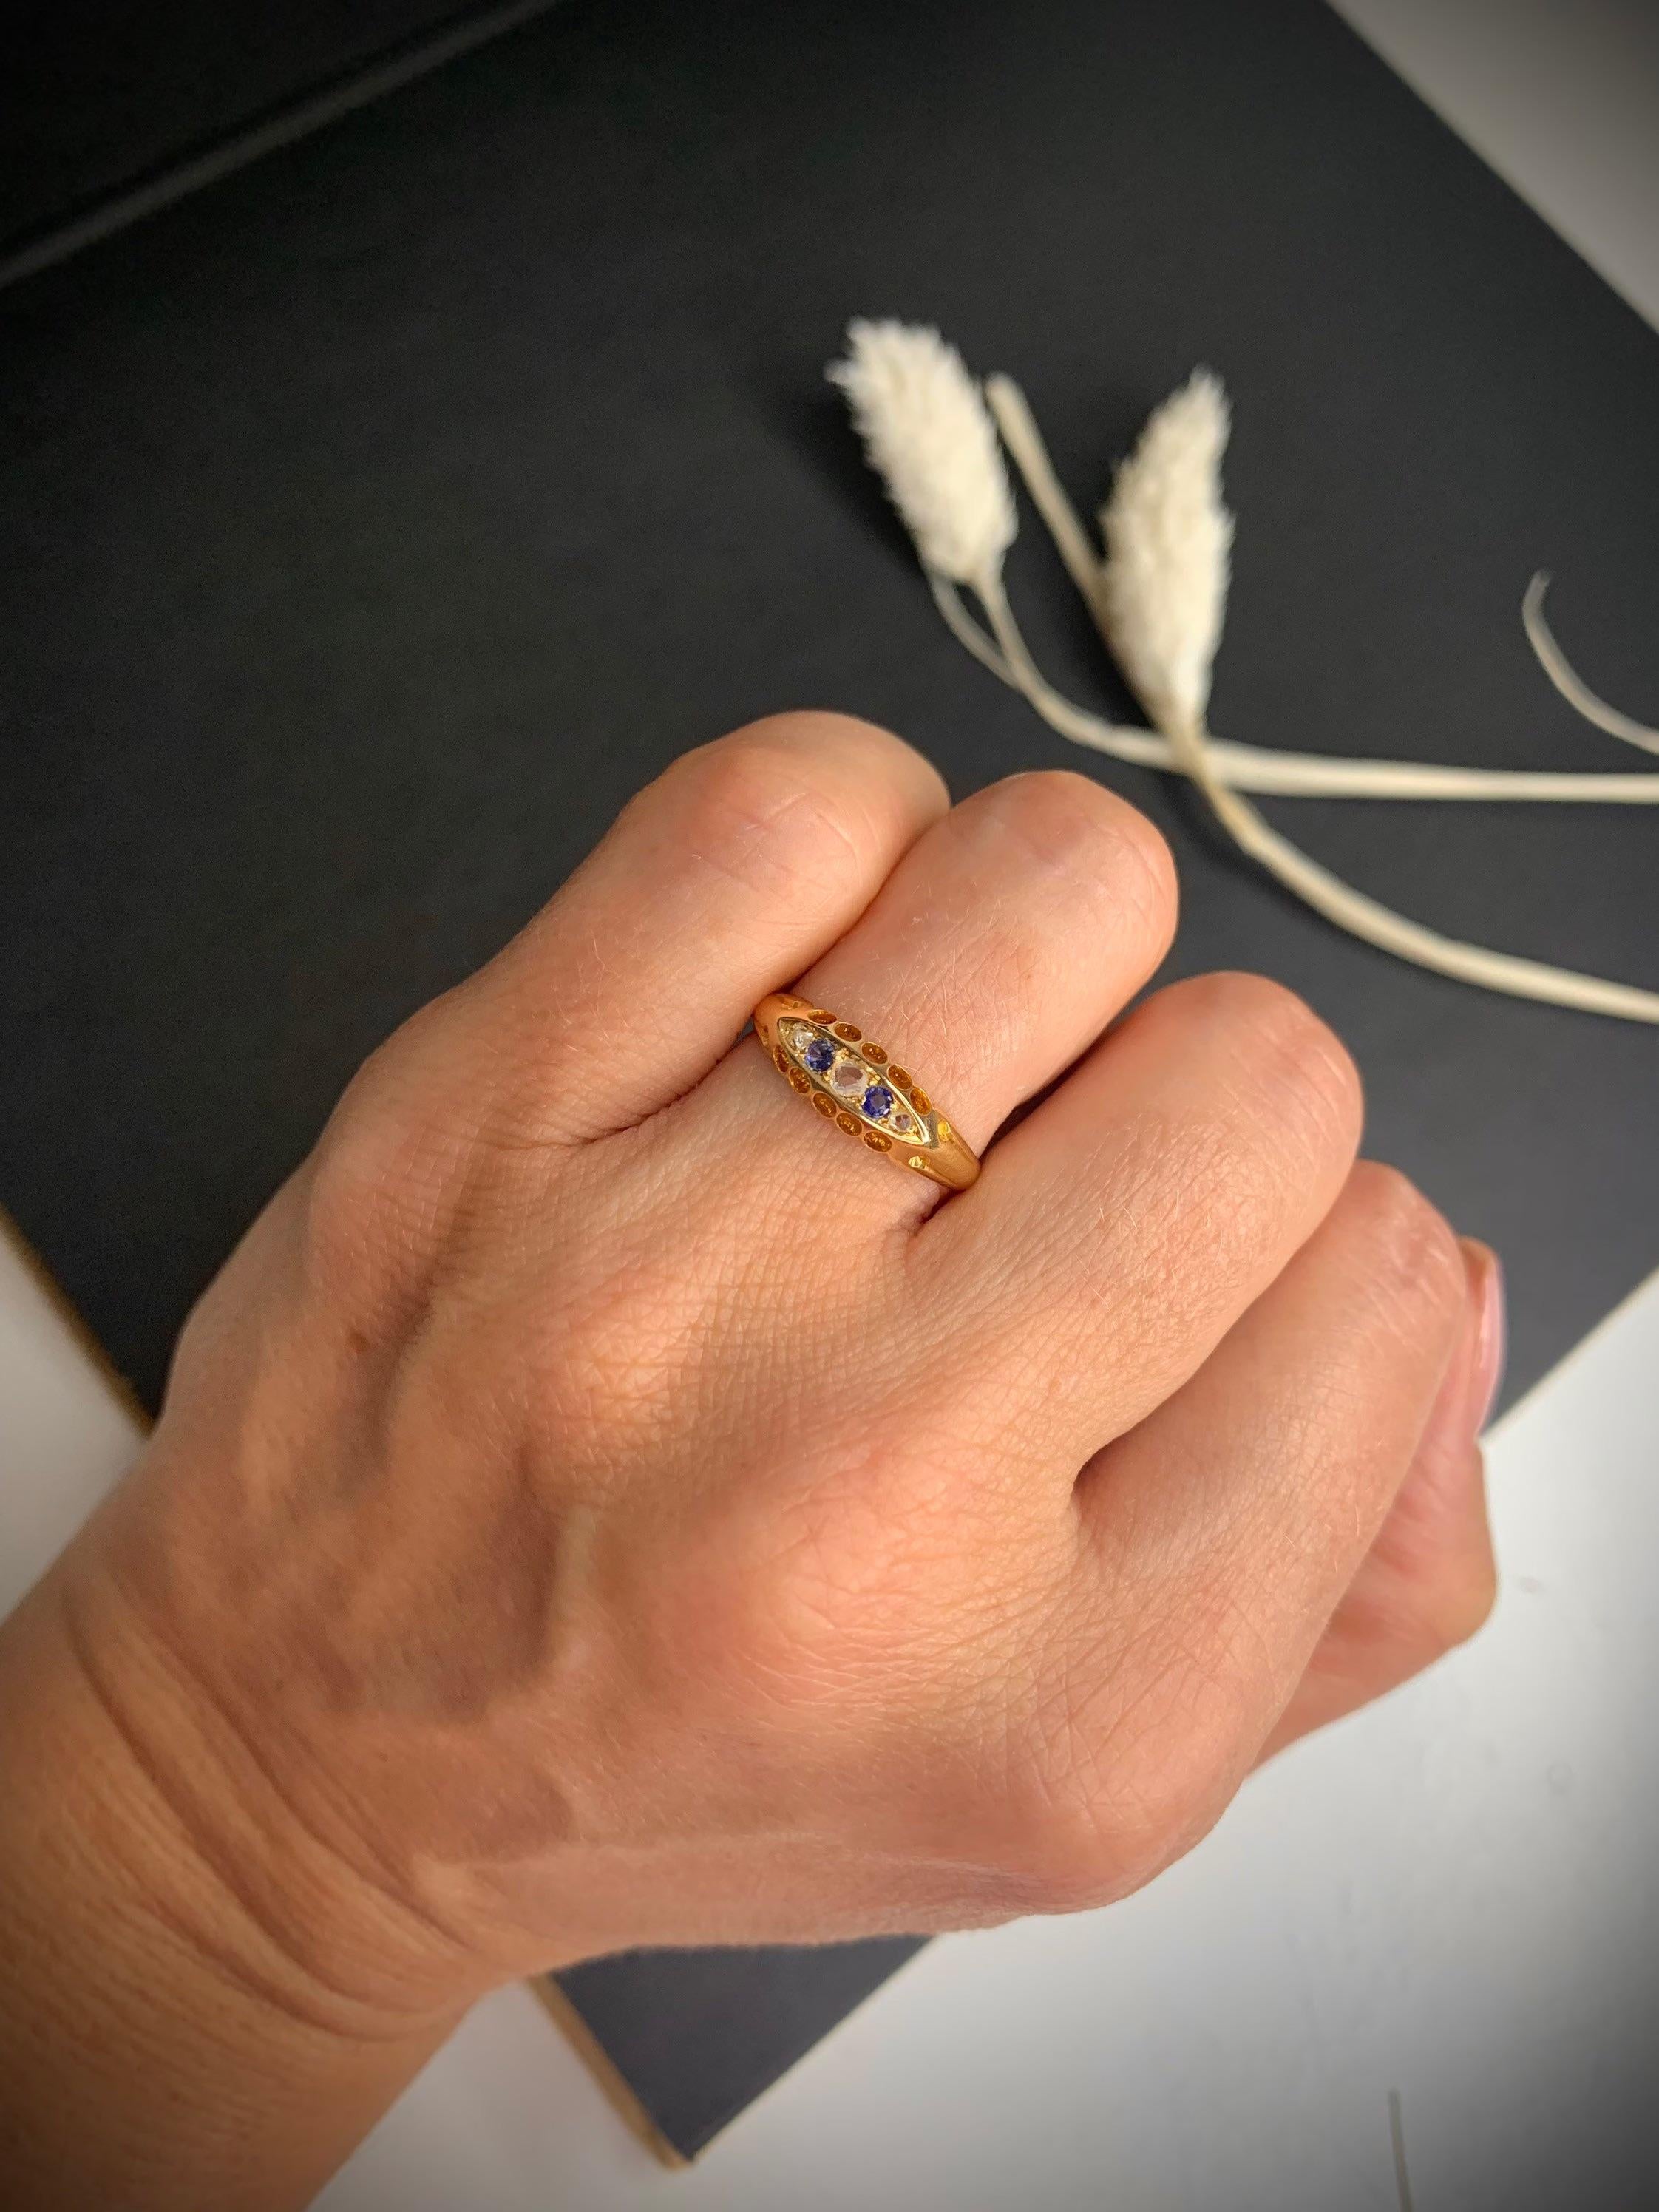 Sapphire & Diamond Gypsy Ring 

18ct Gold 

Set with Beautiful Sapphires & Diamonds 

Hallmarked Birmingham 1897

UK Size K

US Size 5 1/4

Can be resized using our resizing service,
please contact us for more information

All of our items are